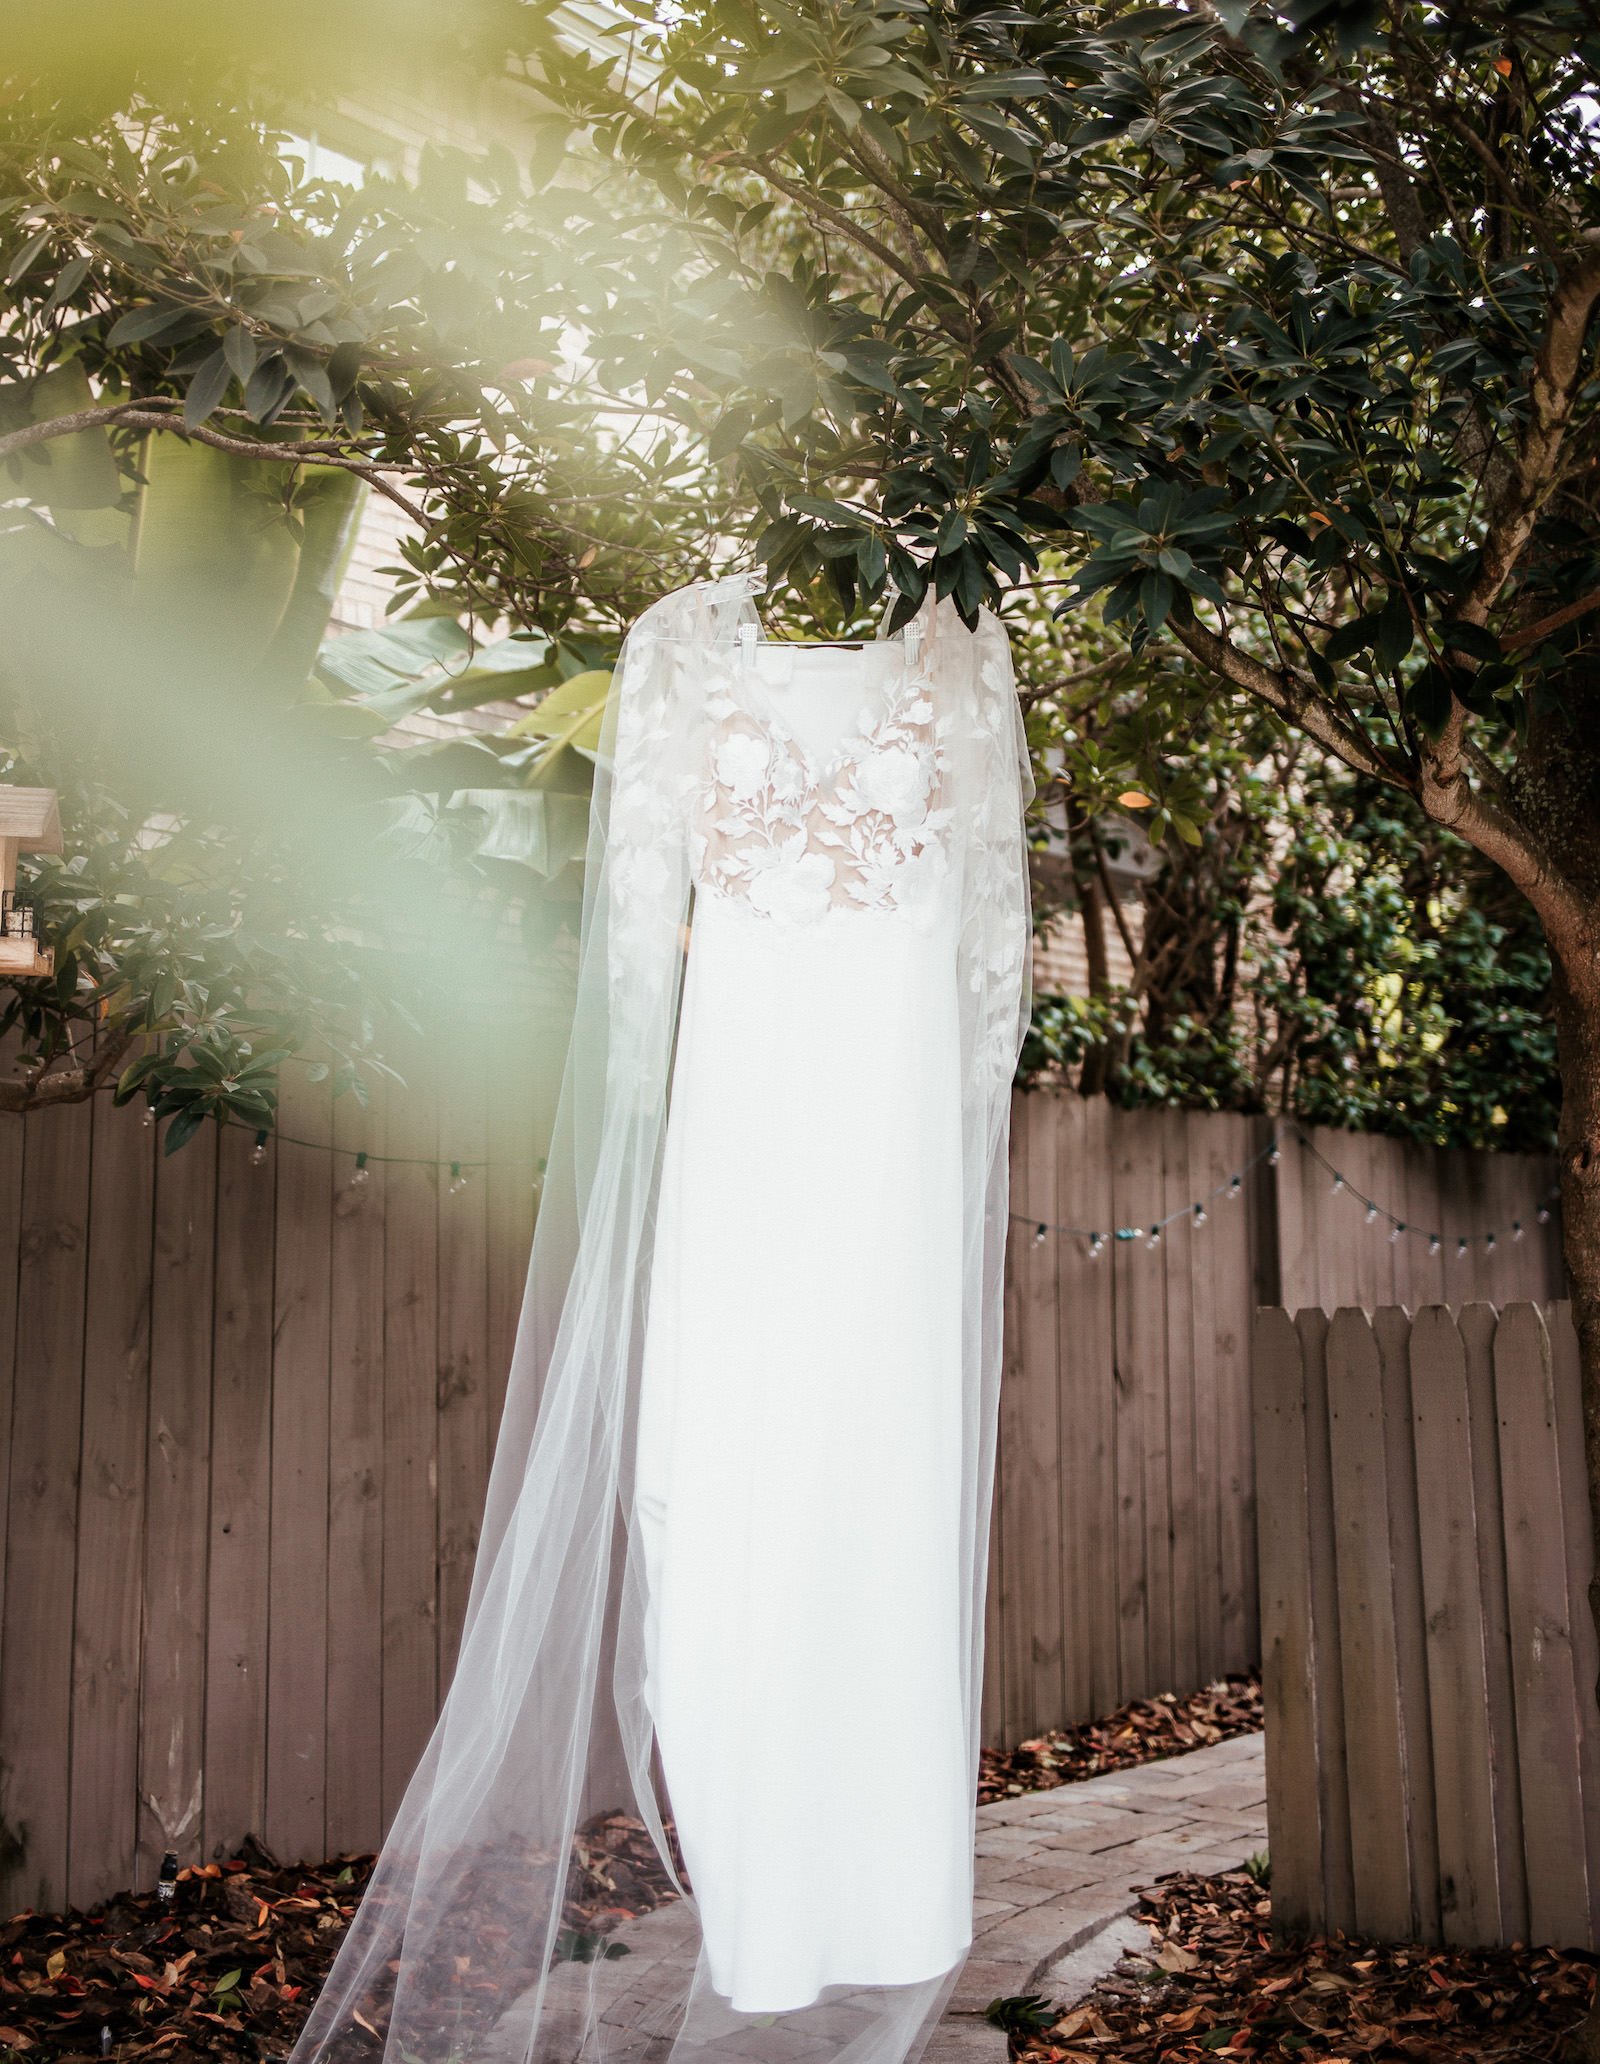 Modern Tropical Wedding Dress Hanging From Tree, BHLDN Long Sleeve Illusion Lace Dress